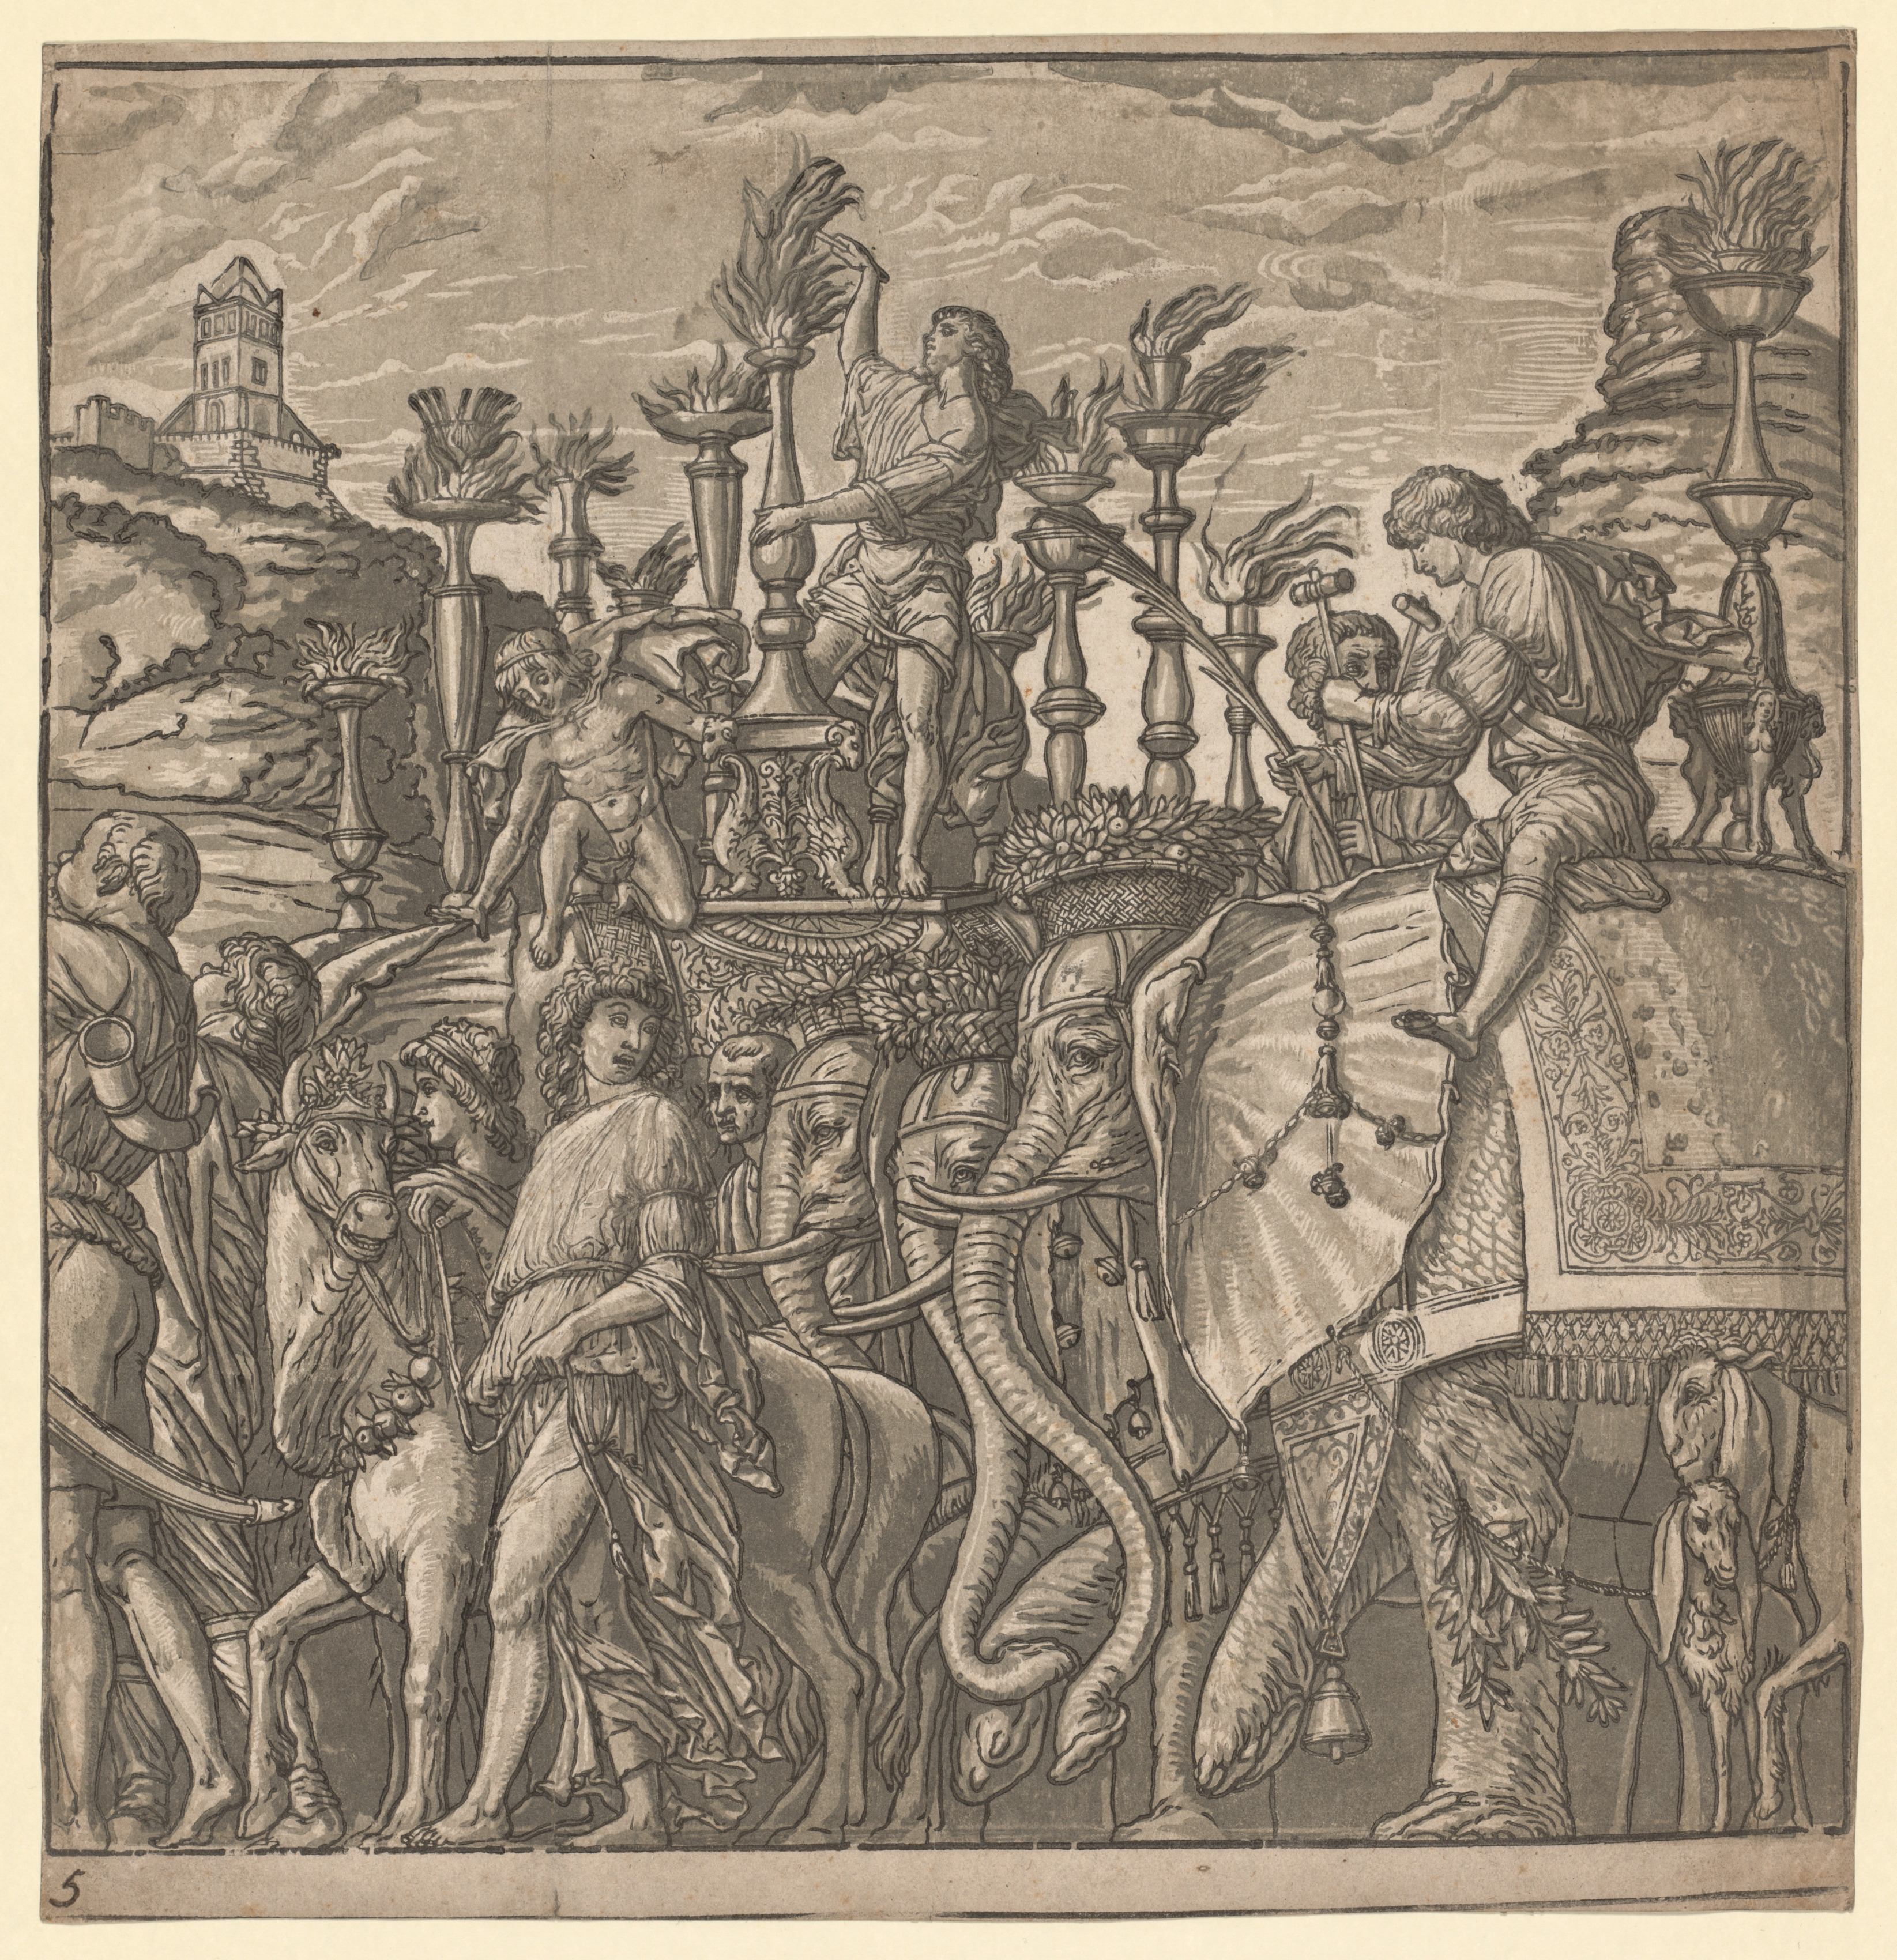 The Triumph of Julius Caesar: Elephants Carrying Torches